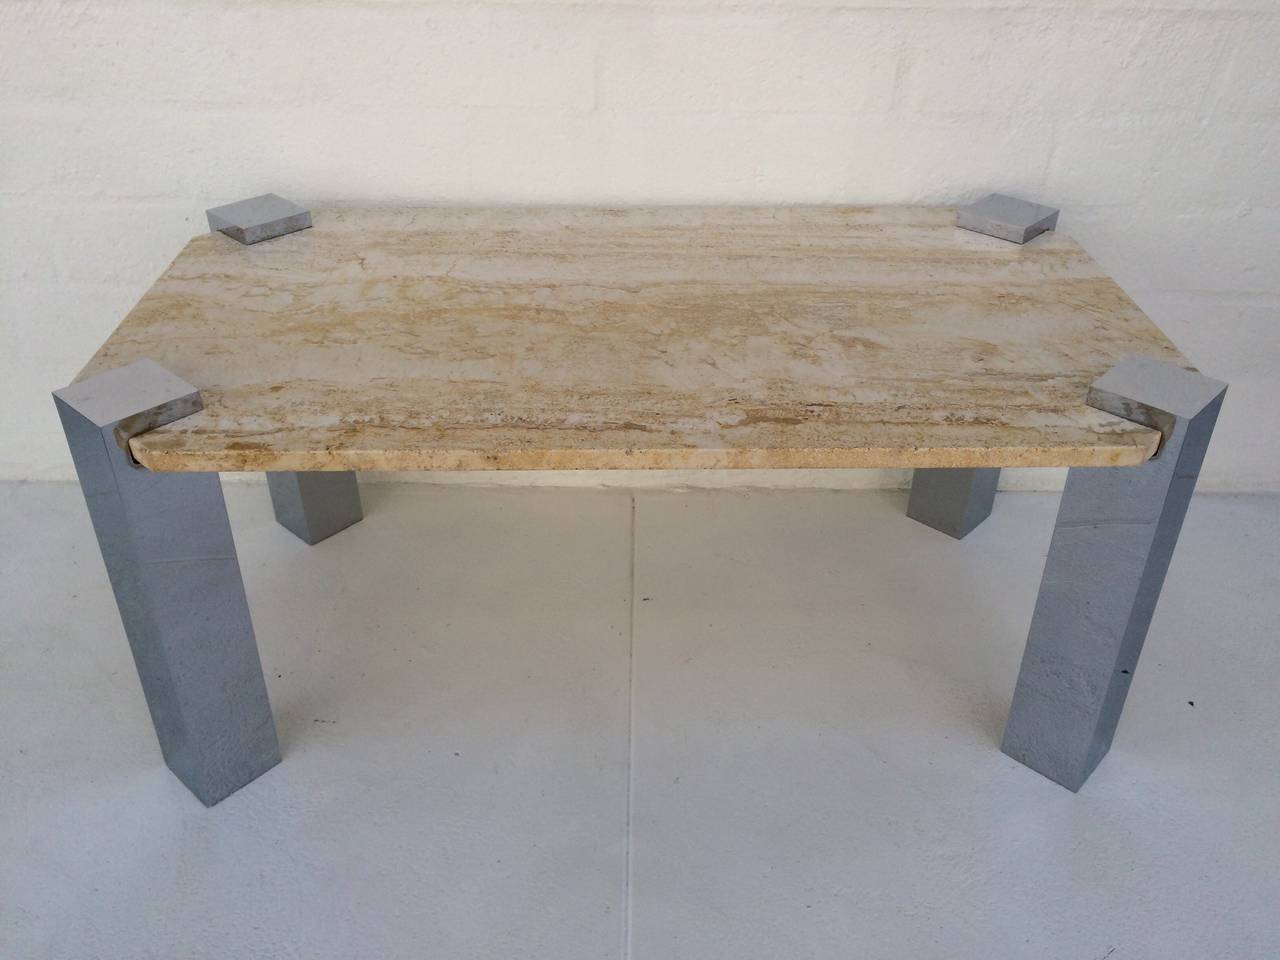 An attractive polished chrome cocktail or coffee table with a travertine top,
circa 1970s.